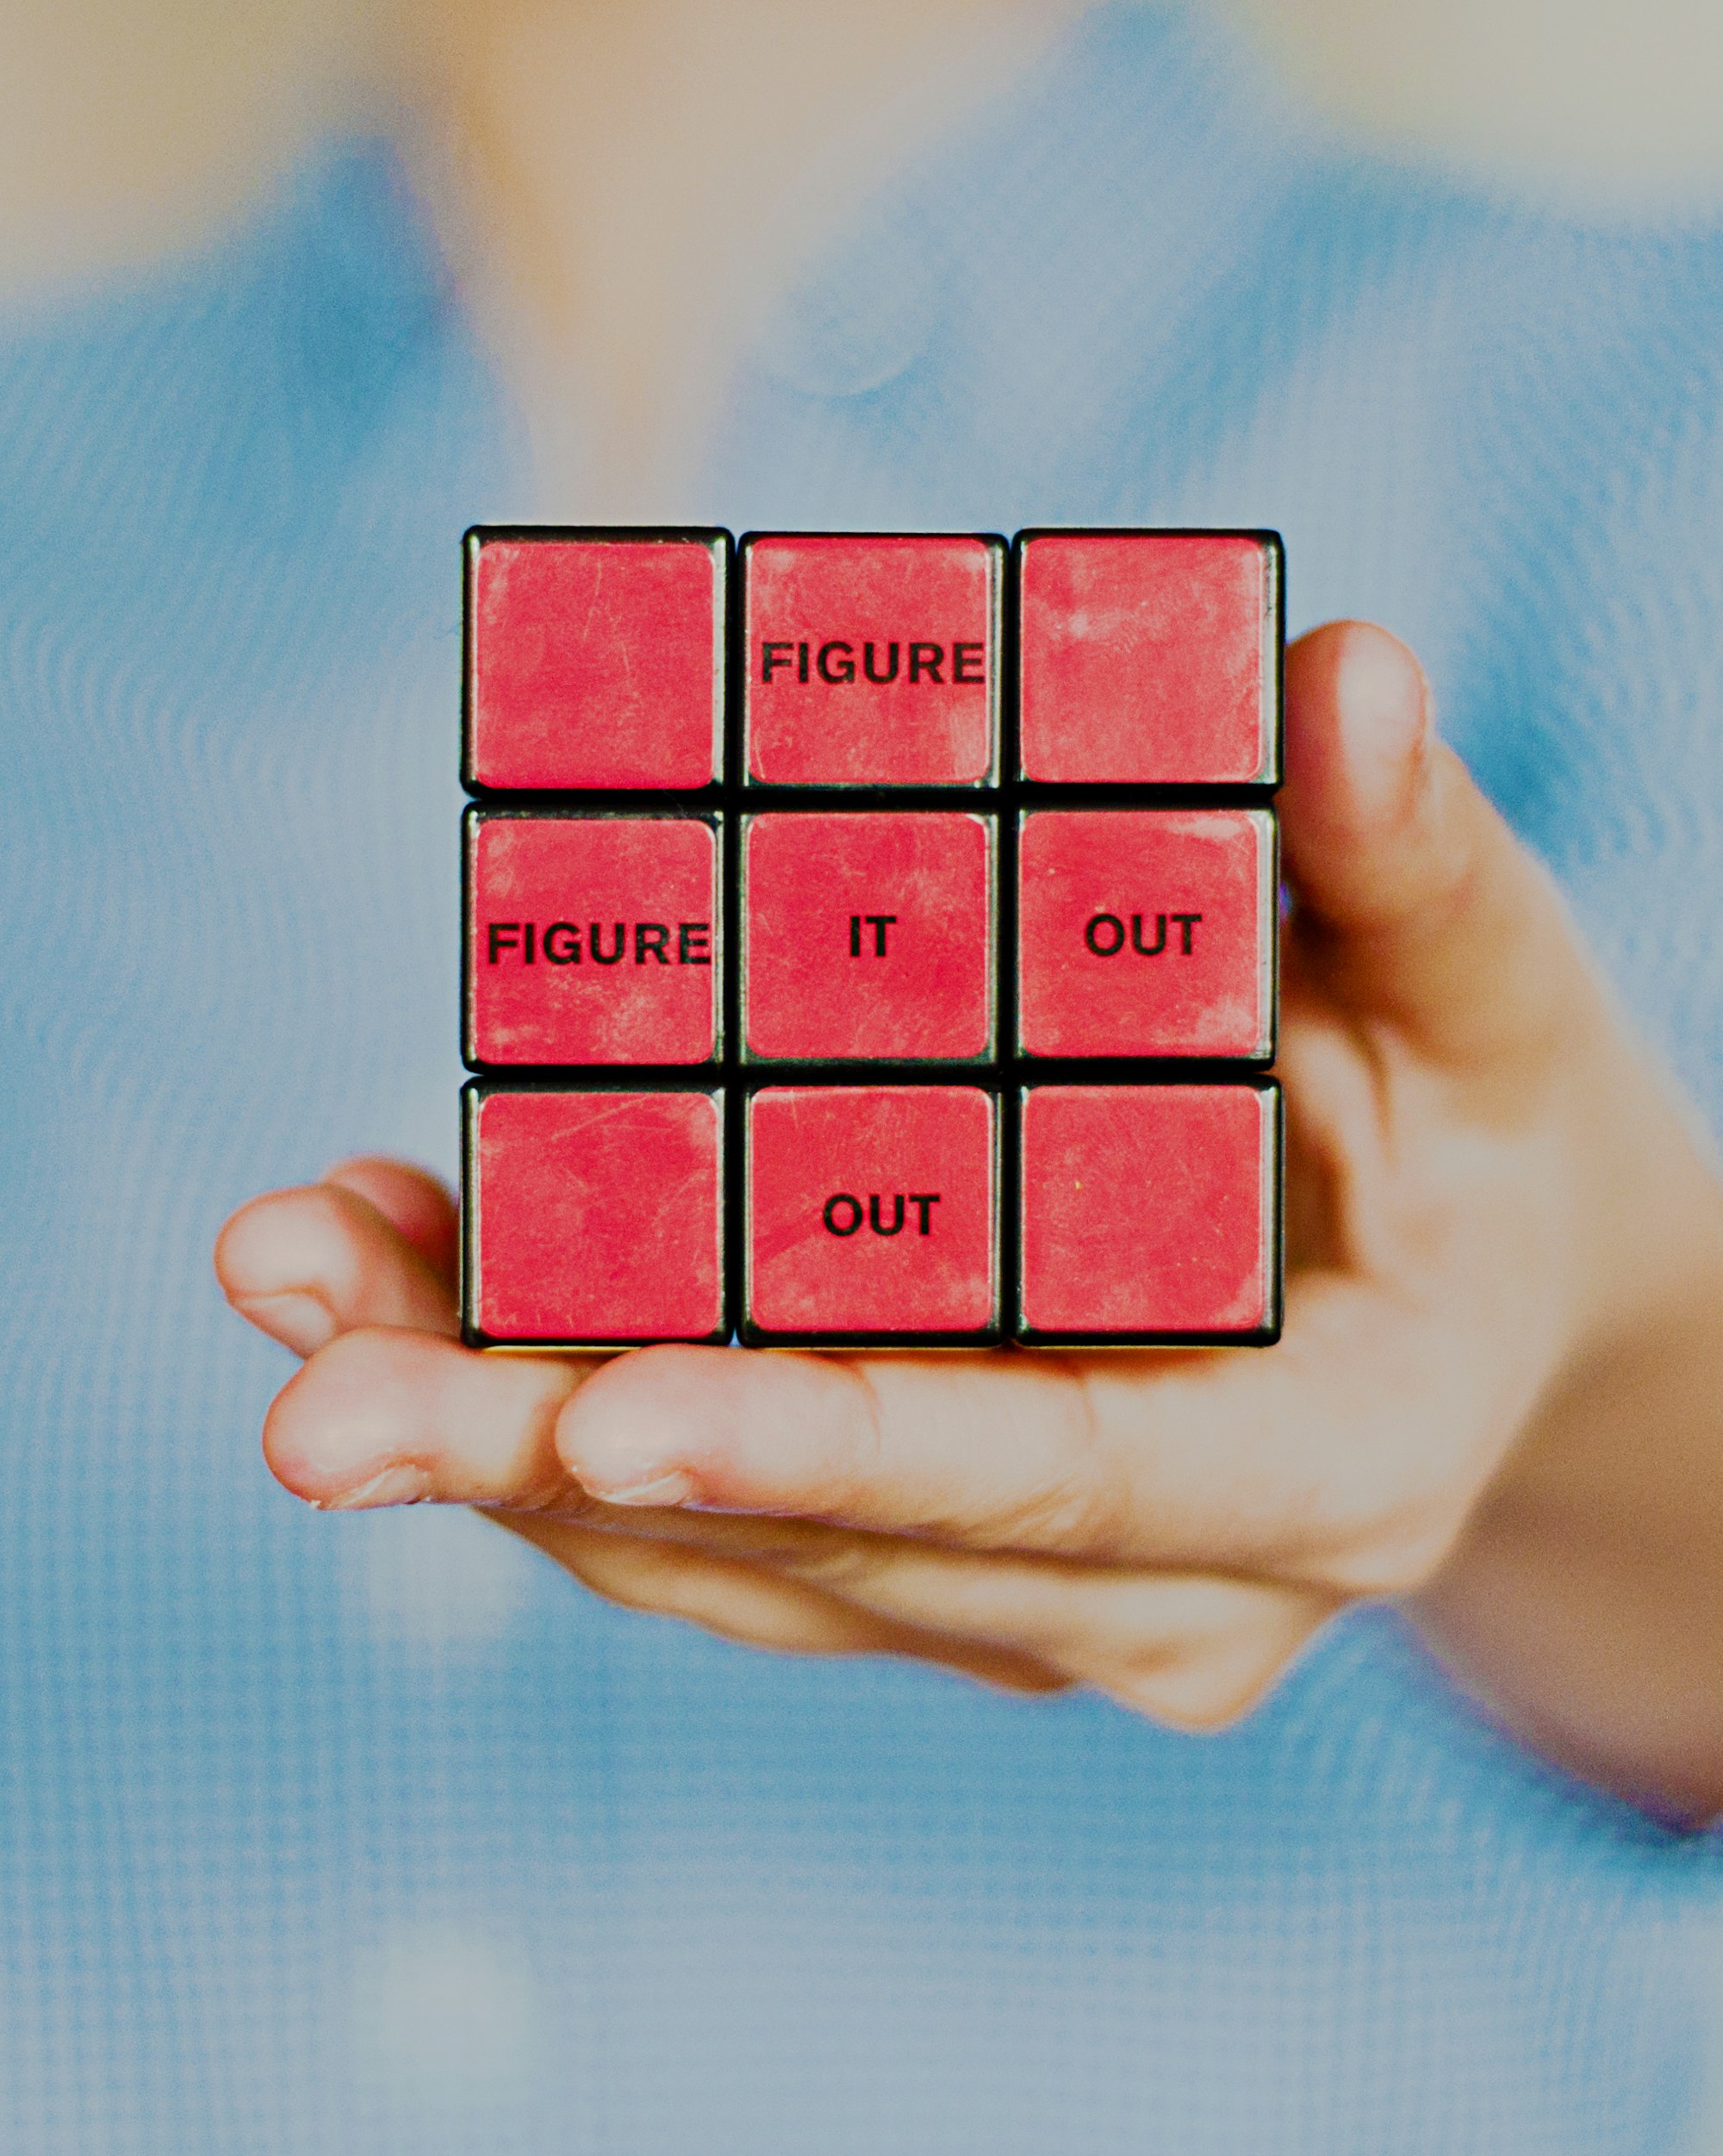 Person holding a solved rubik's cube with the words "figure it out".